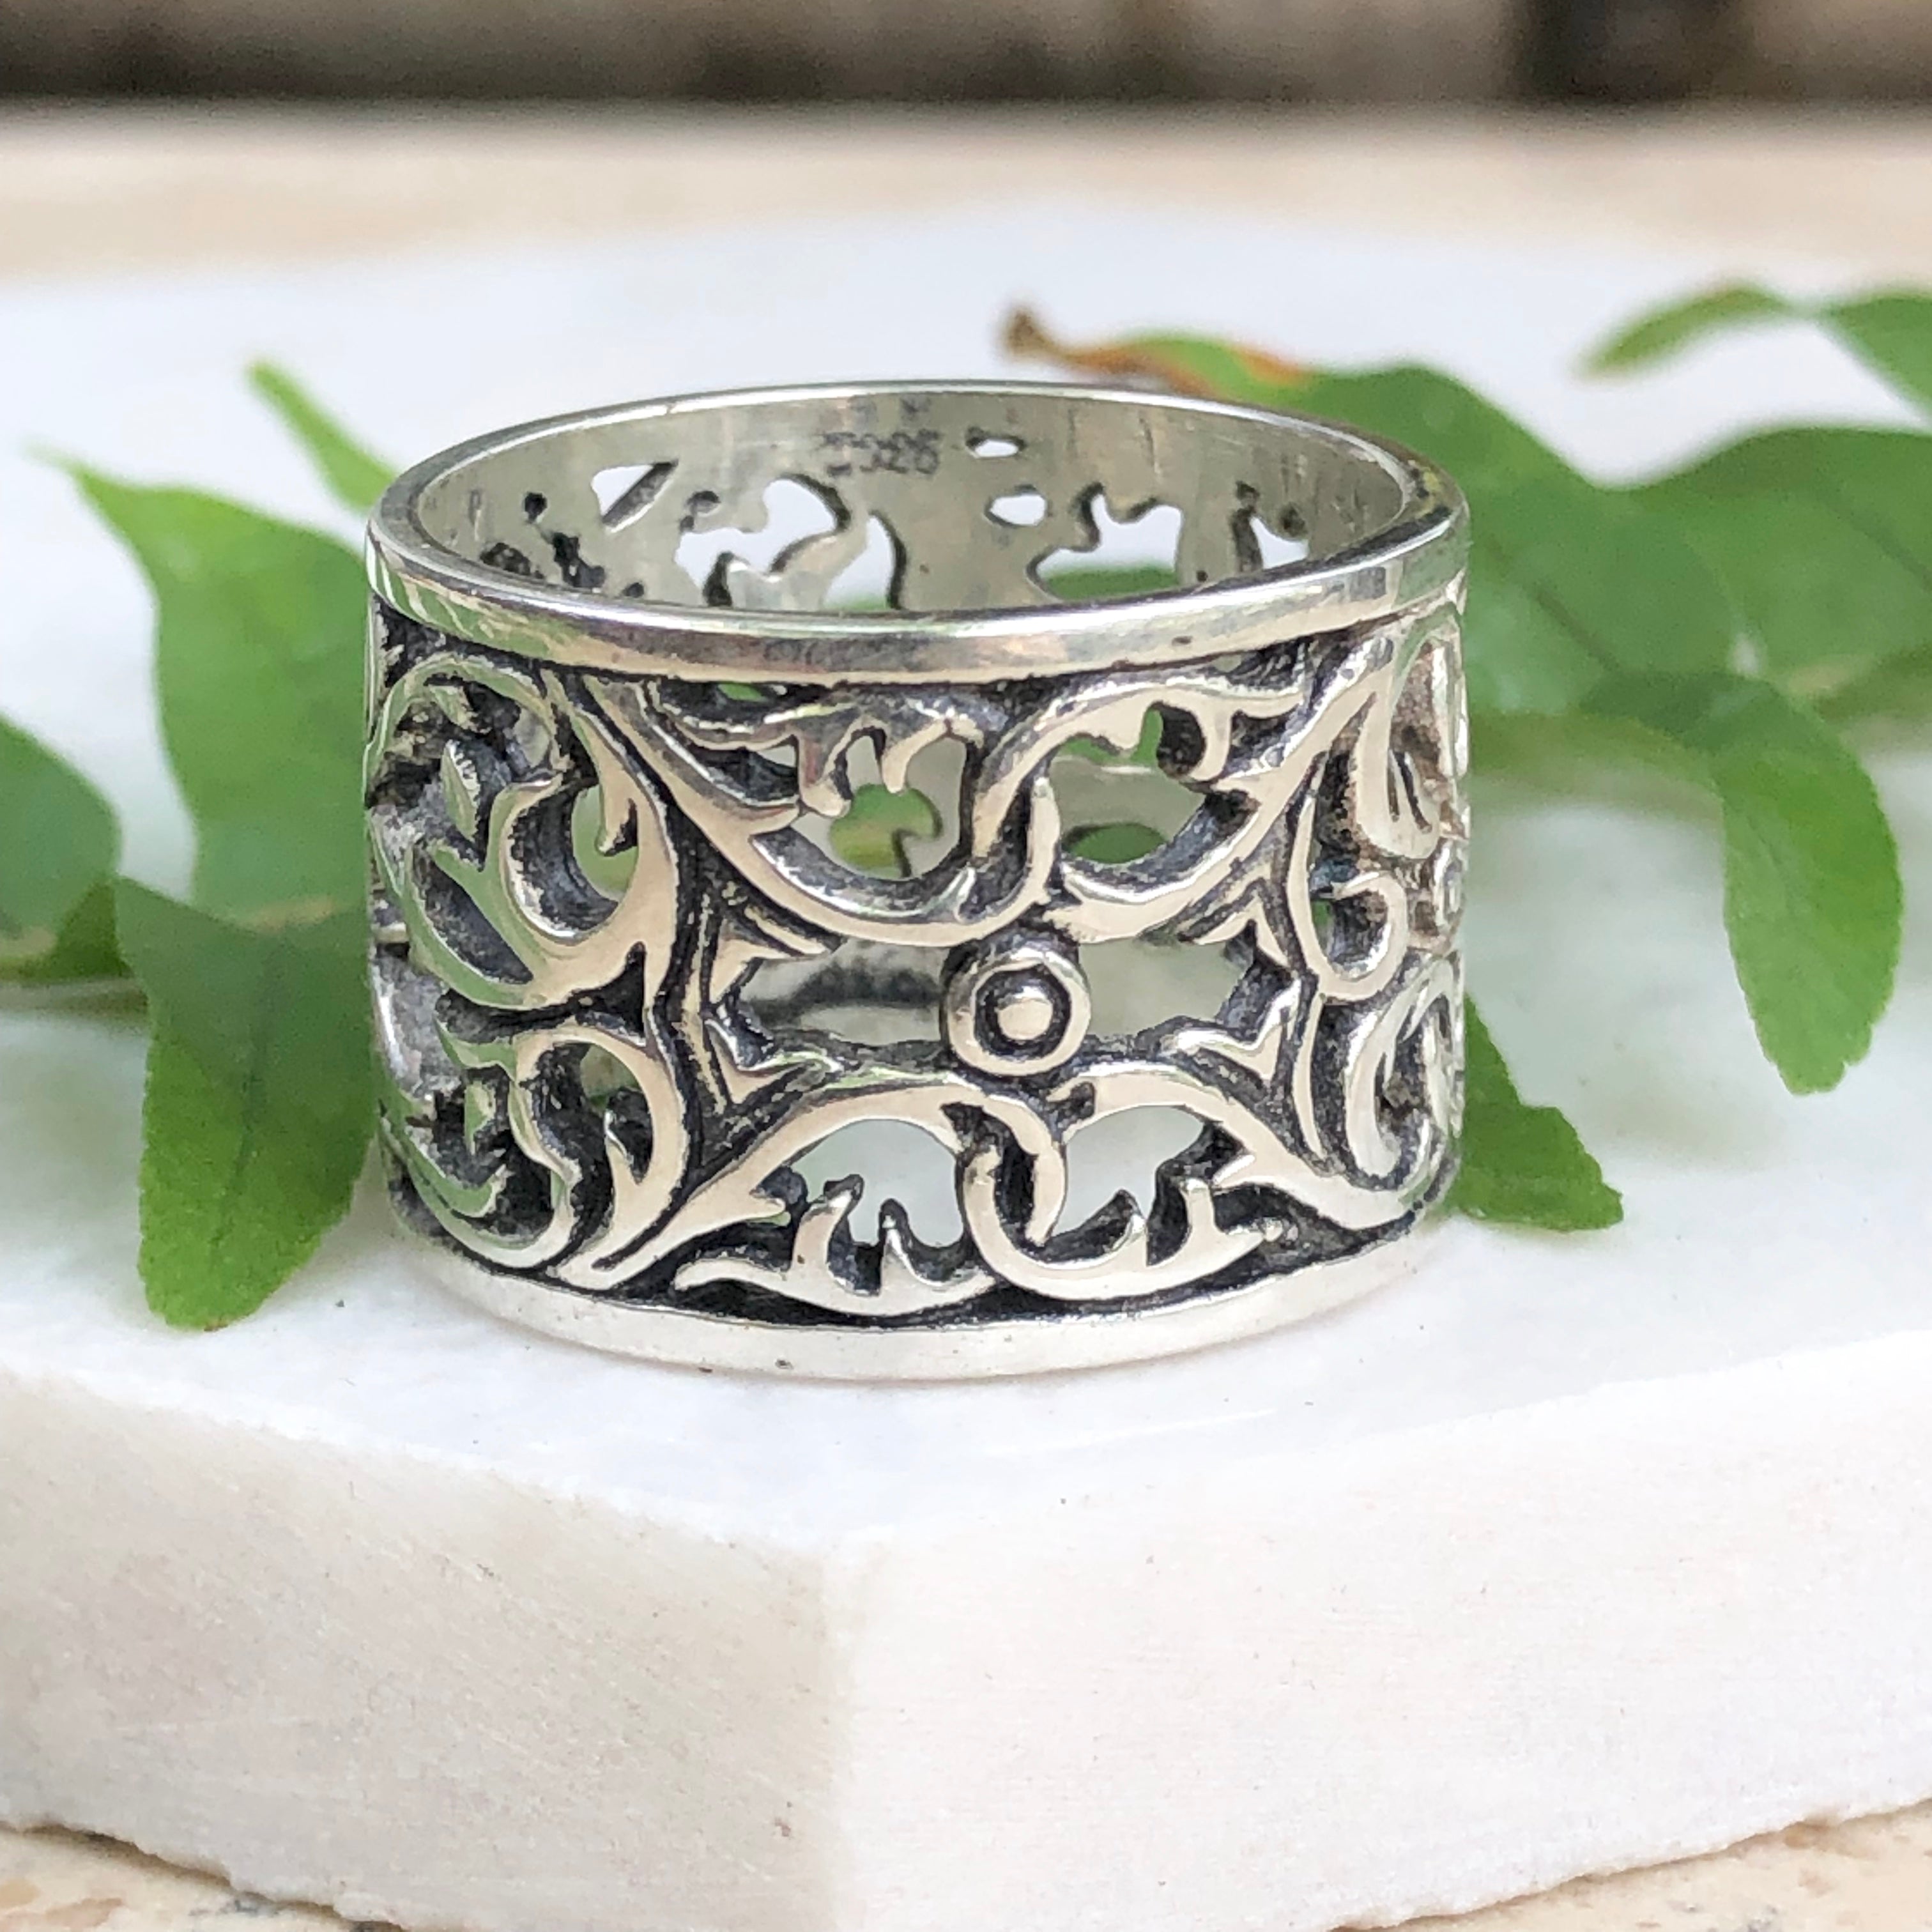 Wildflower Wedding Ring, Sterling Silver Floral Wedding Band, Botanical Ring,  Nature Inspired Ring for Women Moonkist Designs - Etsy | Jewelry, Silver wedding  bands, Sterling silver wedding rings